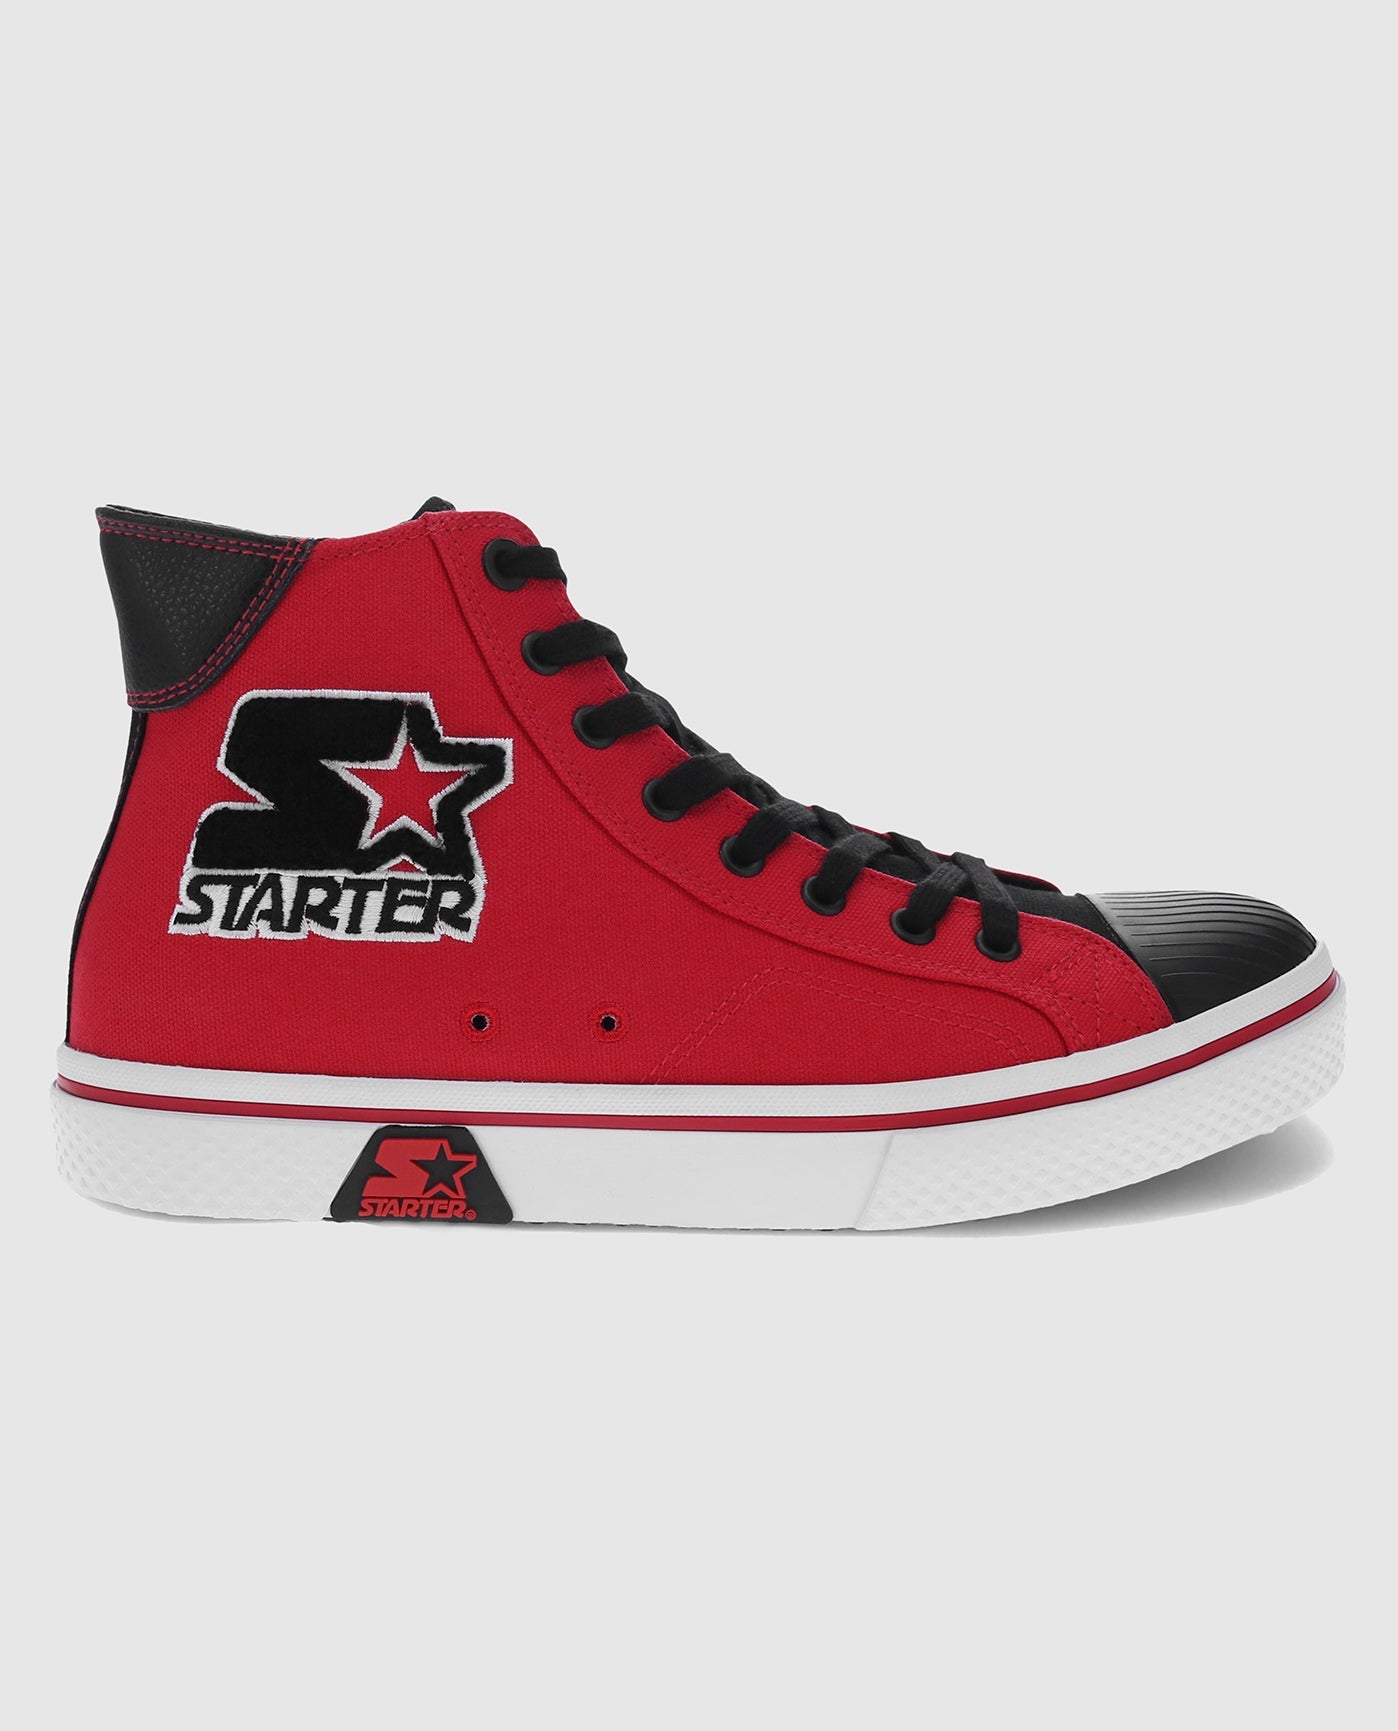 Outside Side View Of Starter Tradition 71 High Red Single Sneaker | Red